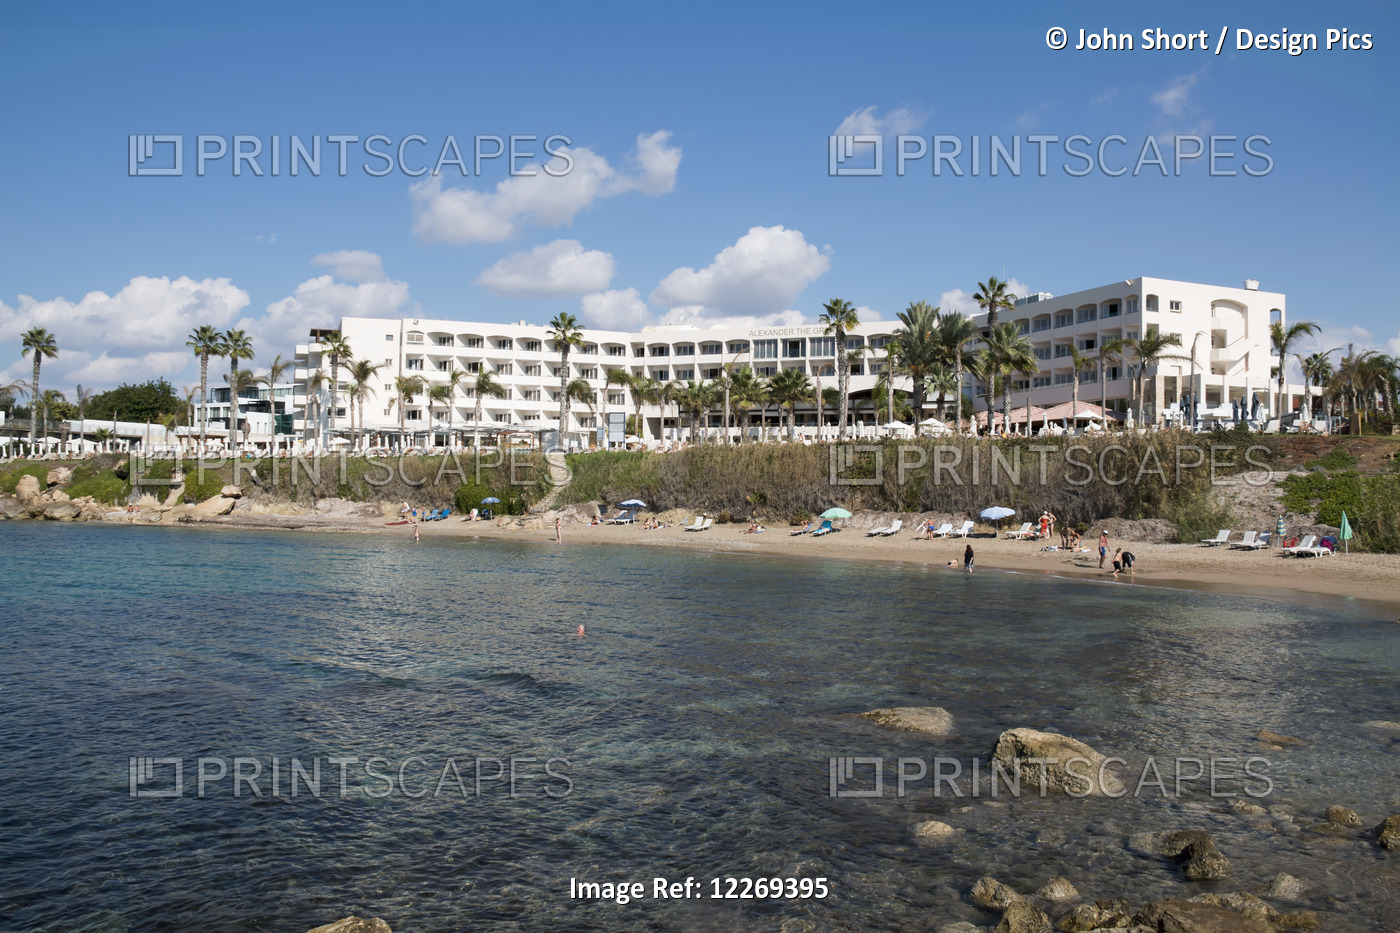 A Hotel And Palm Trees And People On The Beach; Paphos, Cyprus